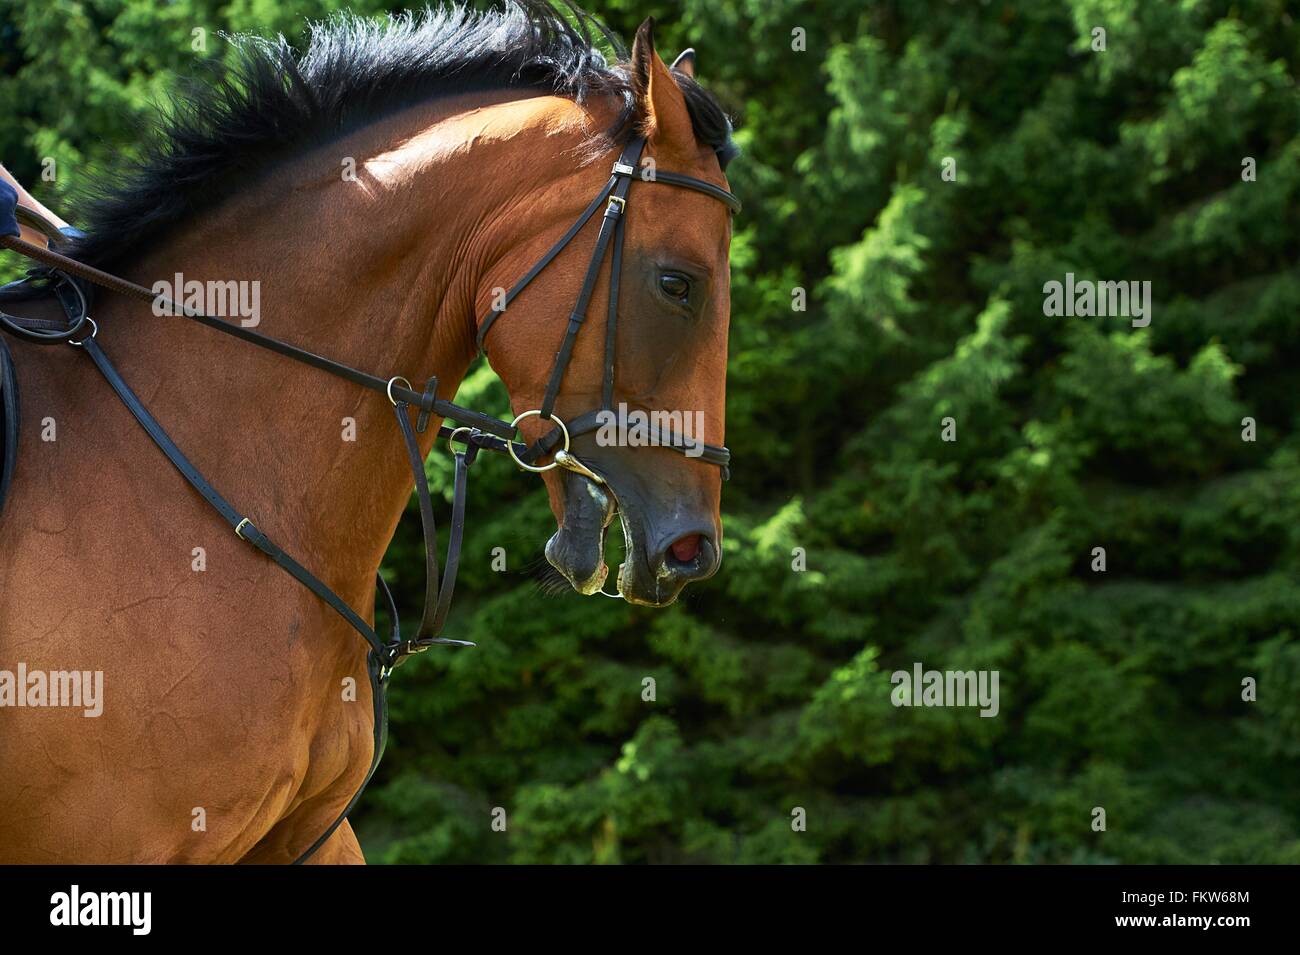 Cropped side view of horses head and shoulders Stock Photo